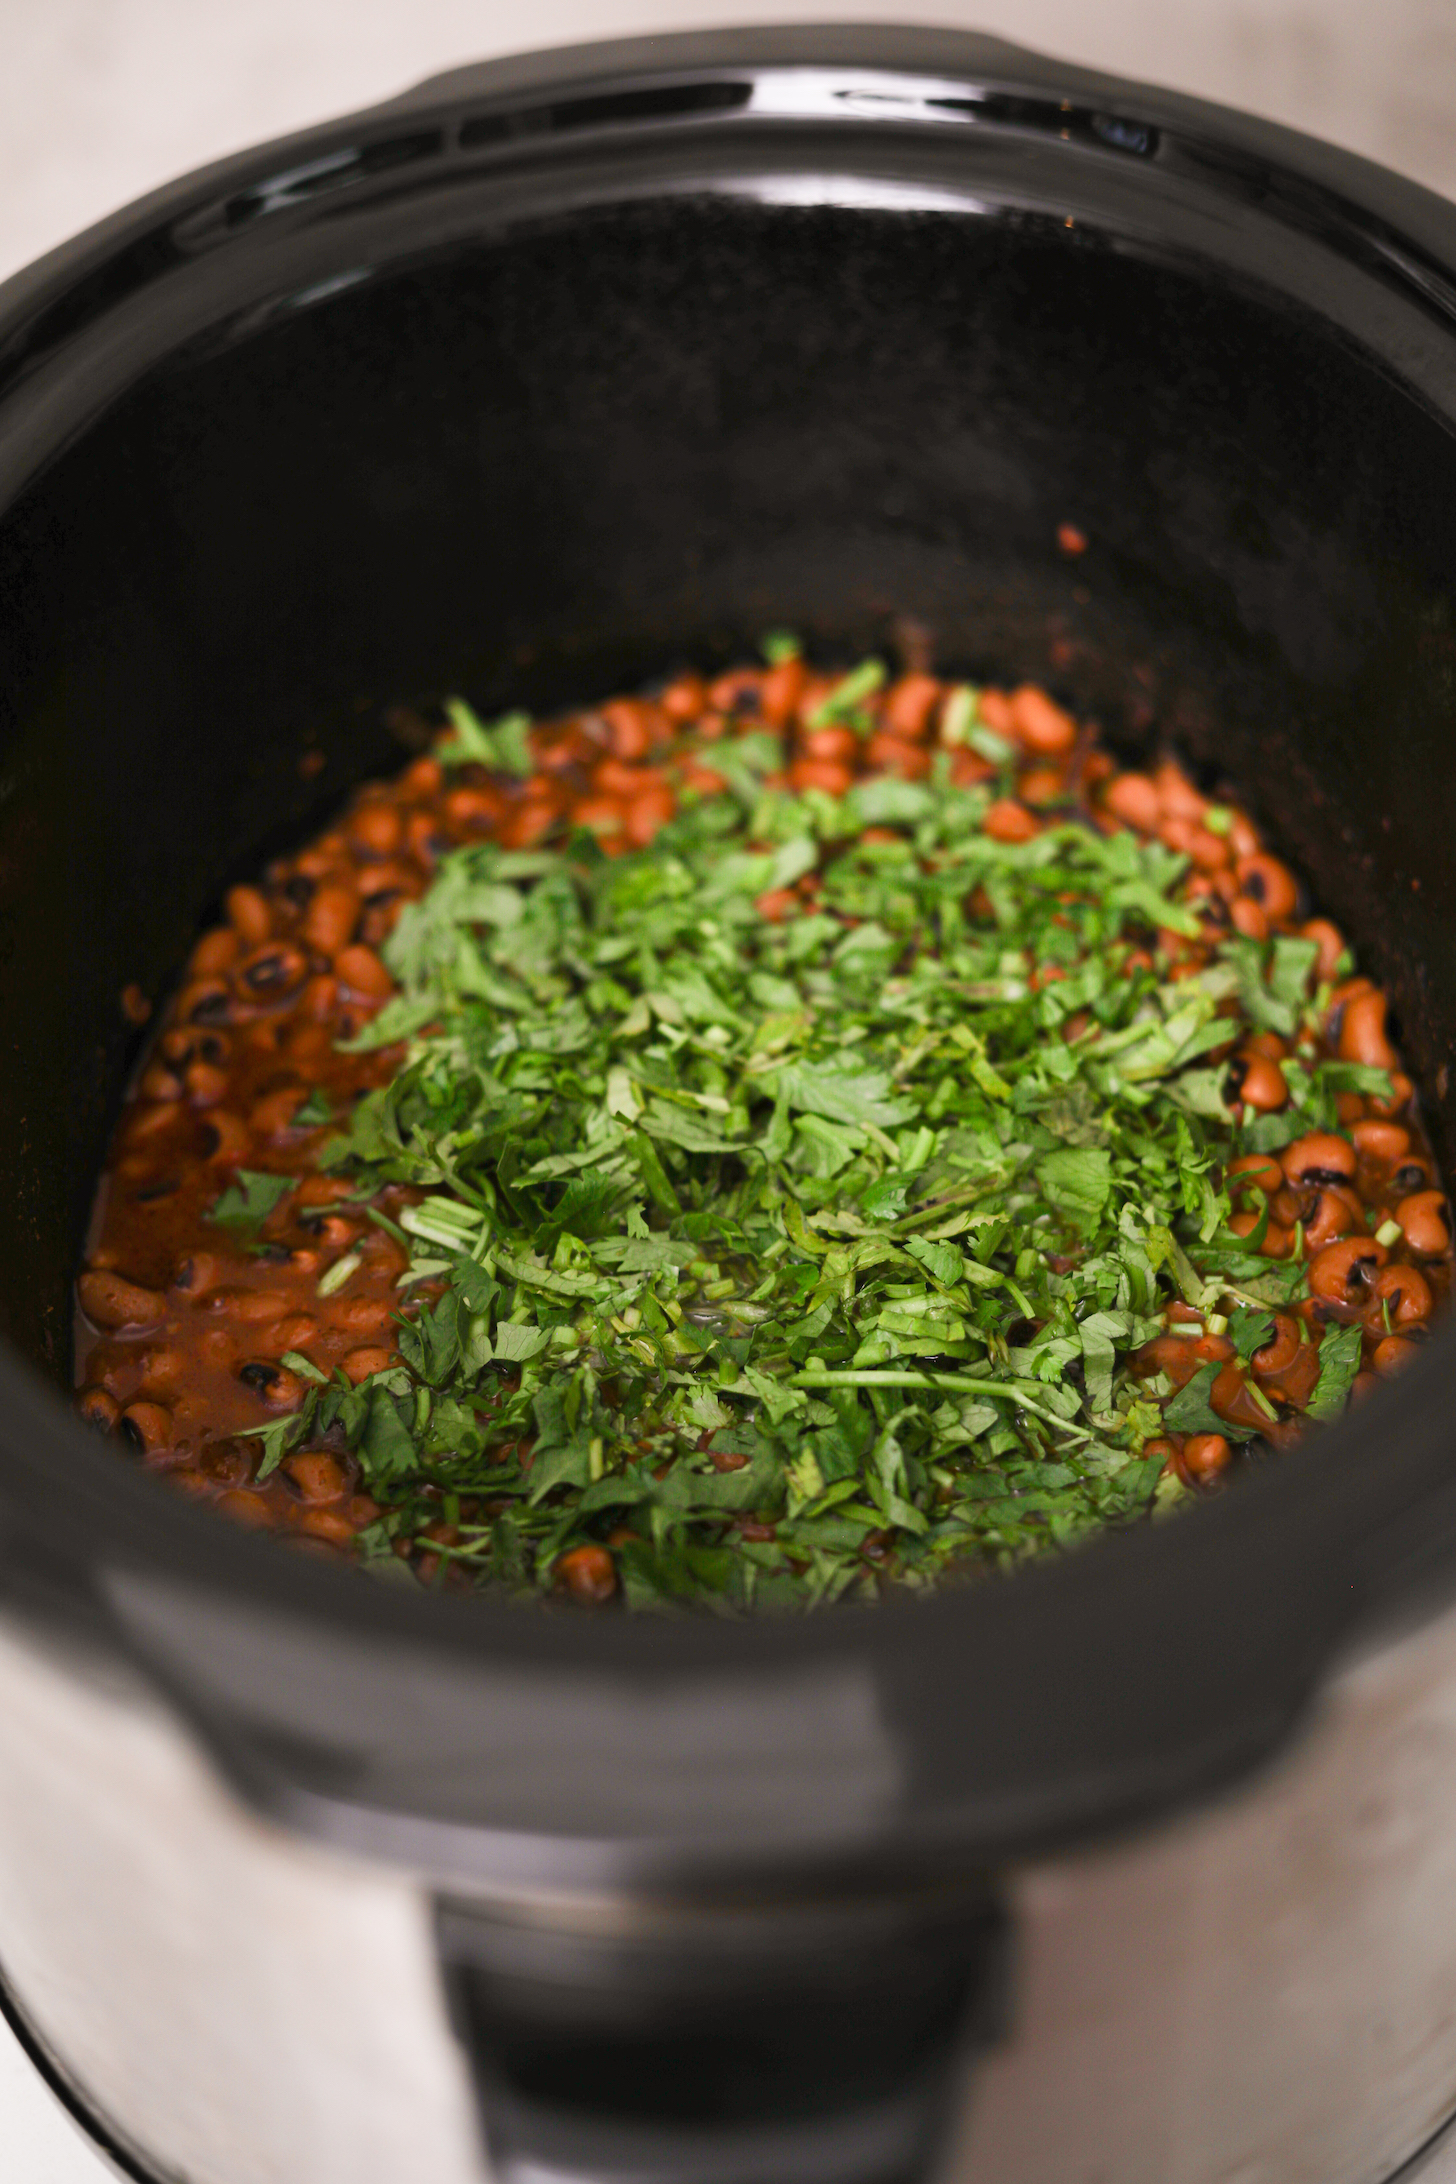 Image of a slow cooker filled with black-eyed peas in a tomato sauce, garnished with finely chopped cilantro.